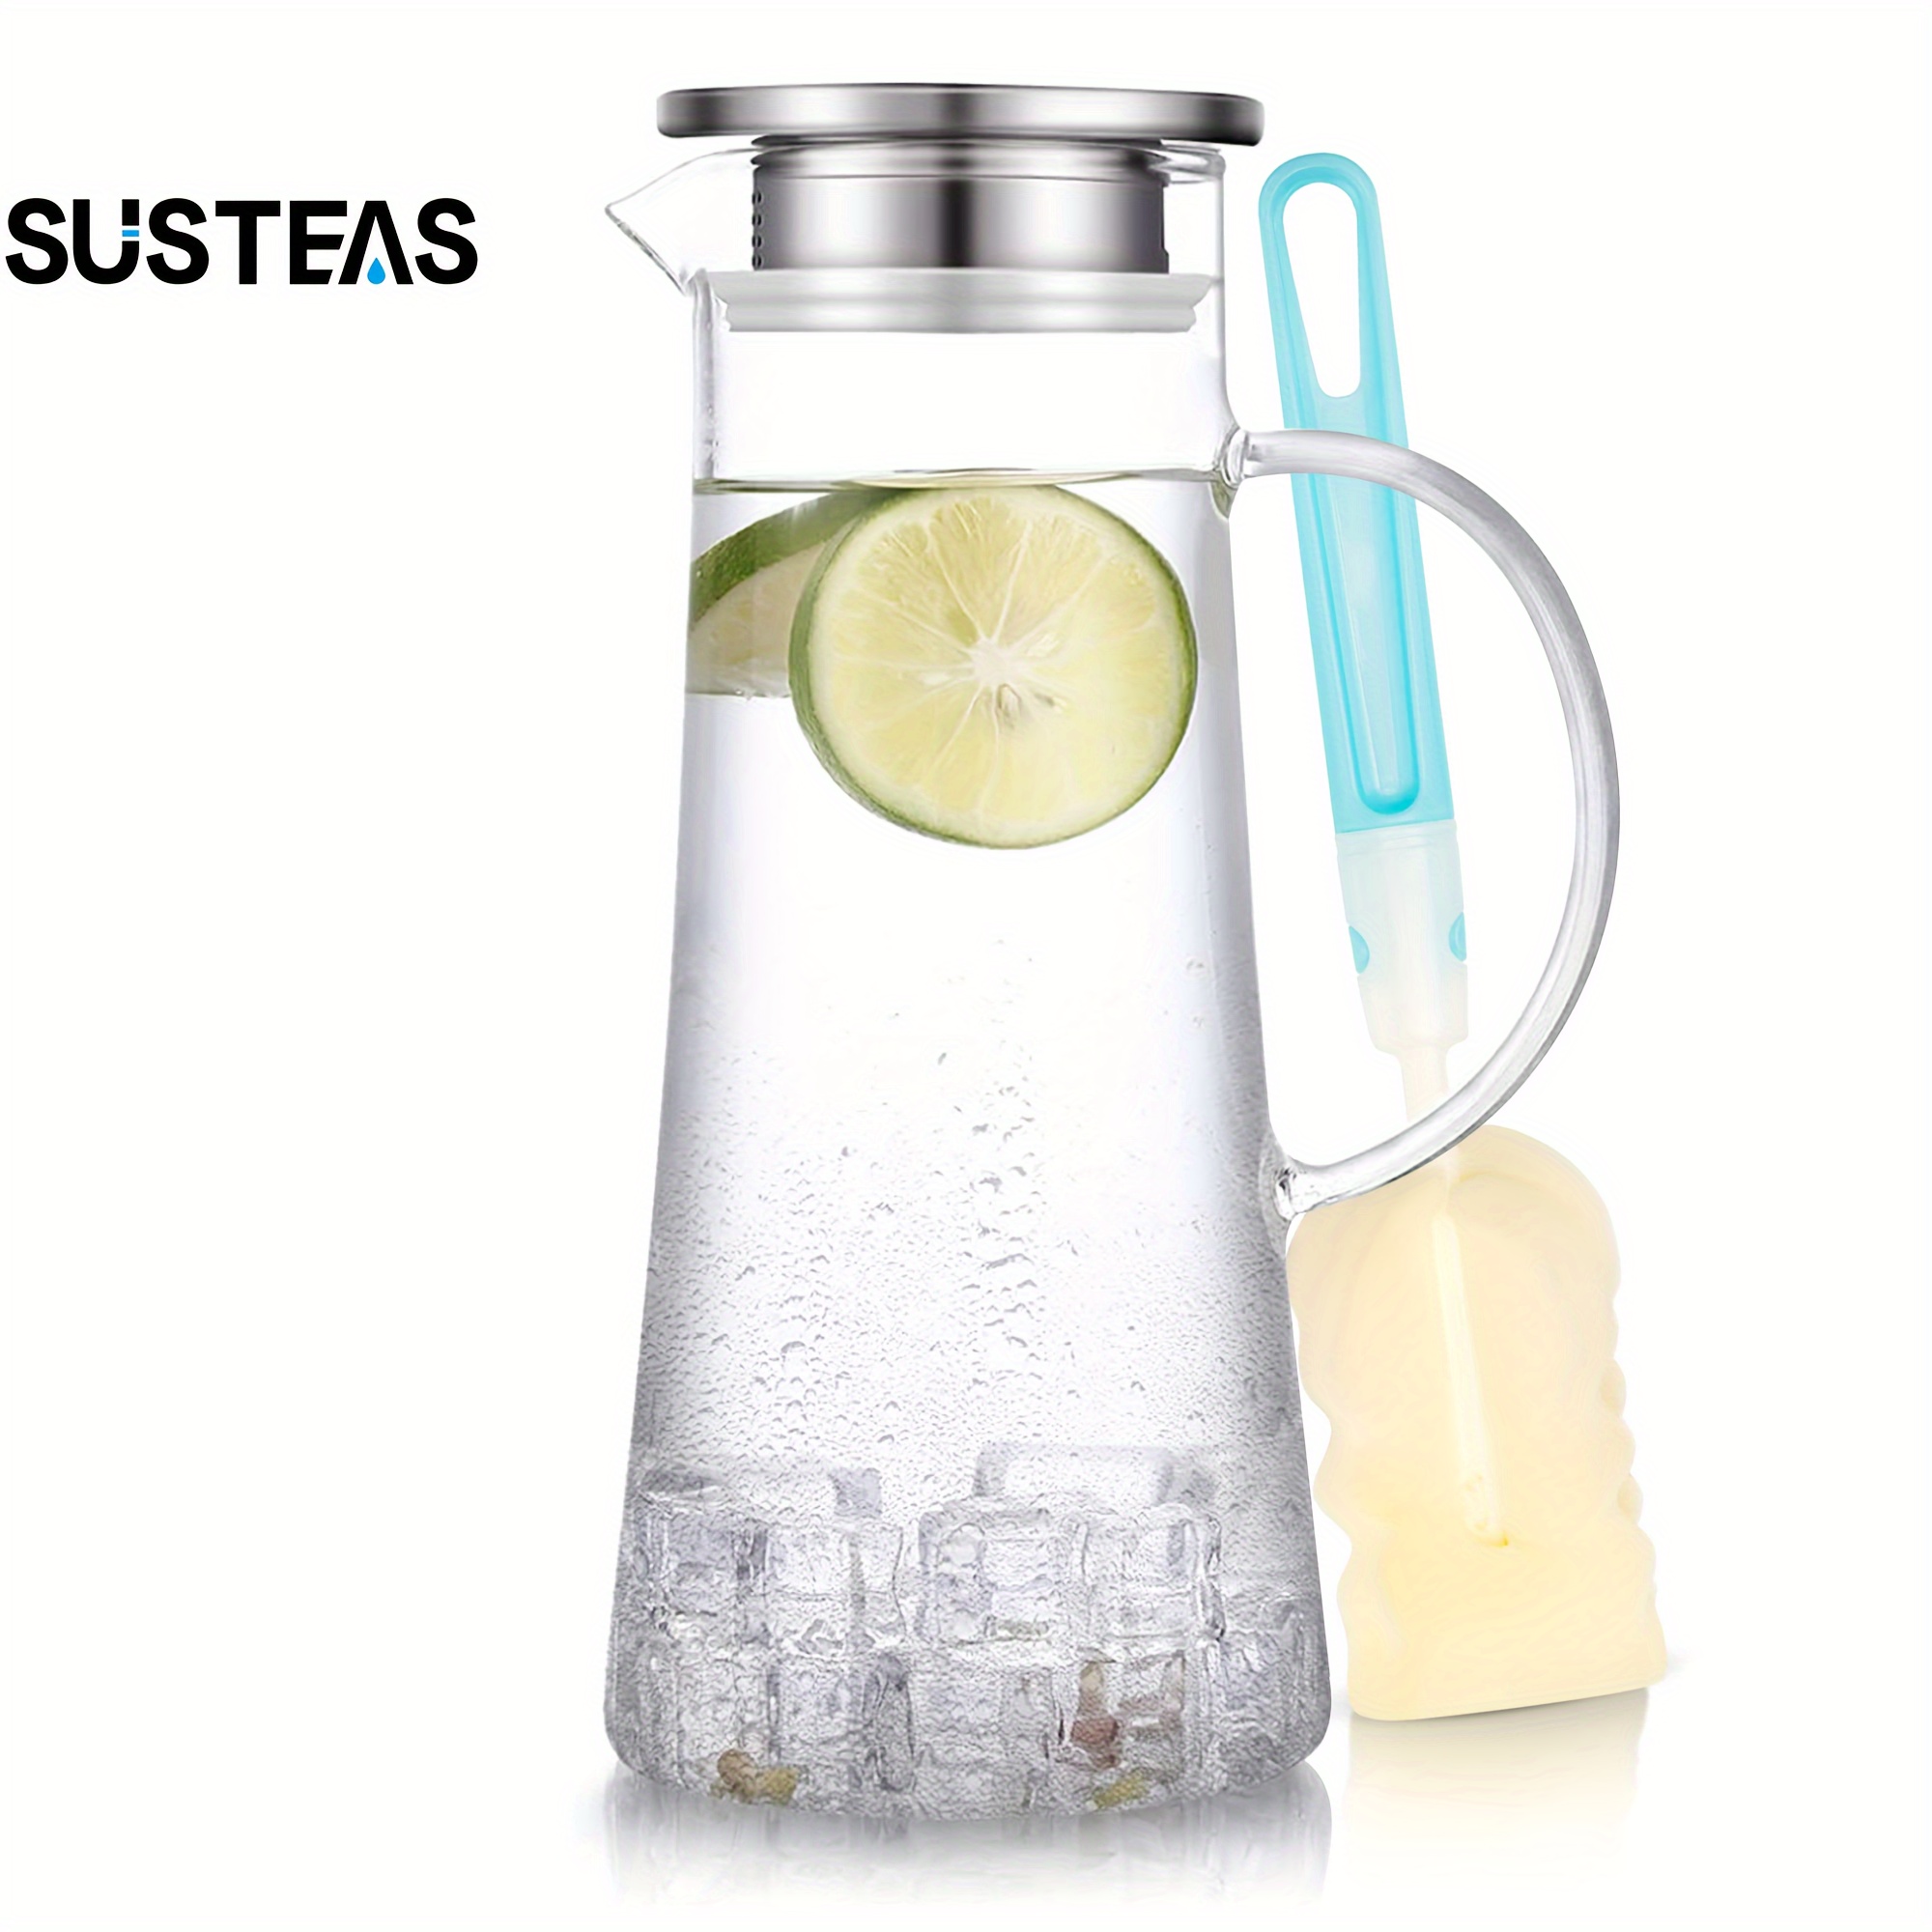 

Susteas 1.5 Liter 51oz Glass Pitcher With Lid, Easy Clean Heat Resistant Carafe With Handle For Hot/cold Beverages - Water, Cold Brew, Iced Tea & Juice, 1 Free Long-handled Brush Included